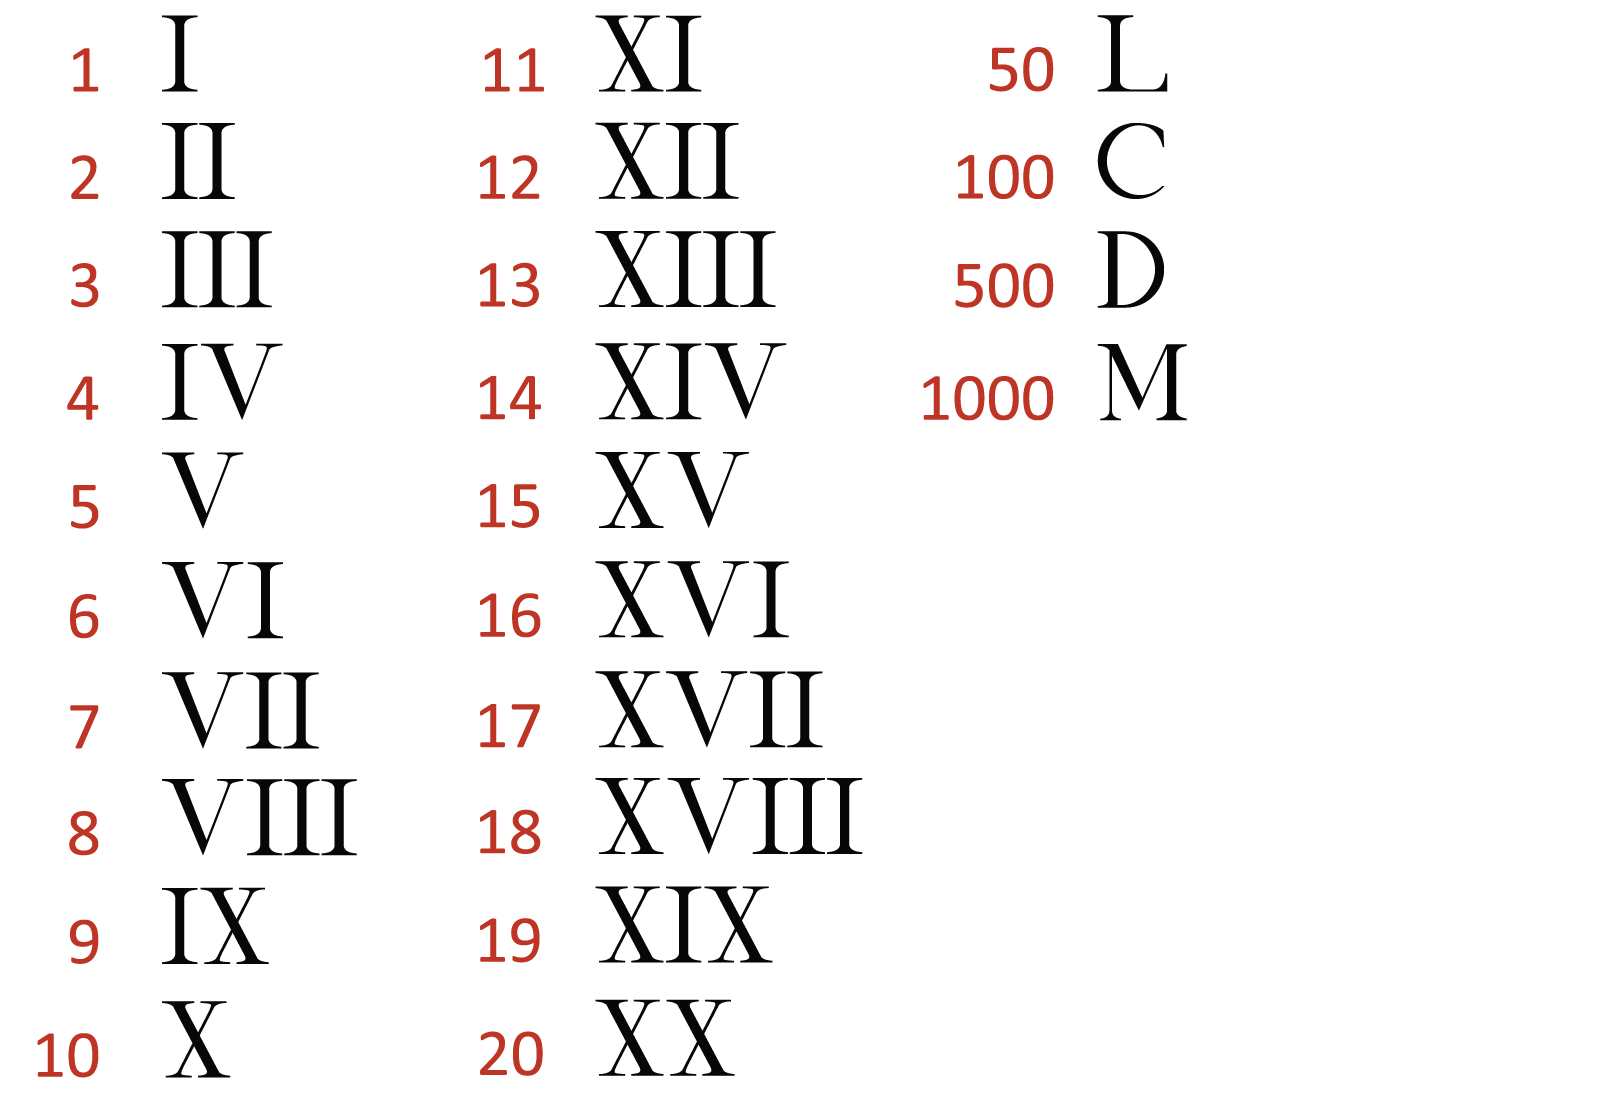 download-free-printable-roman-numerals-1-10000-chart-in-pdf